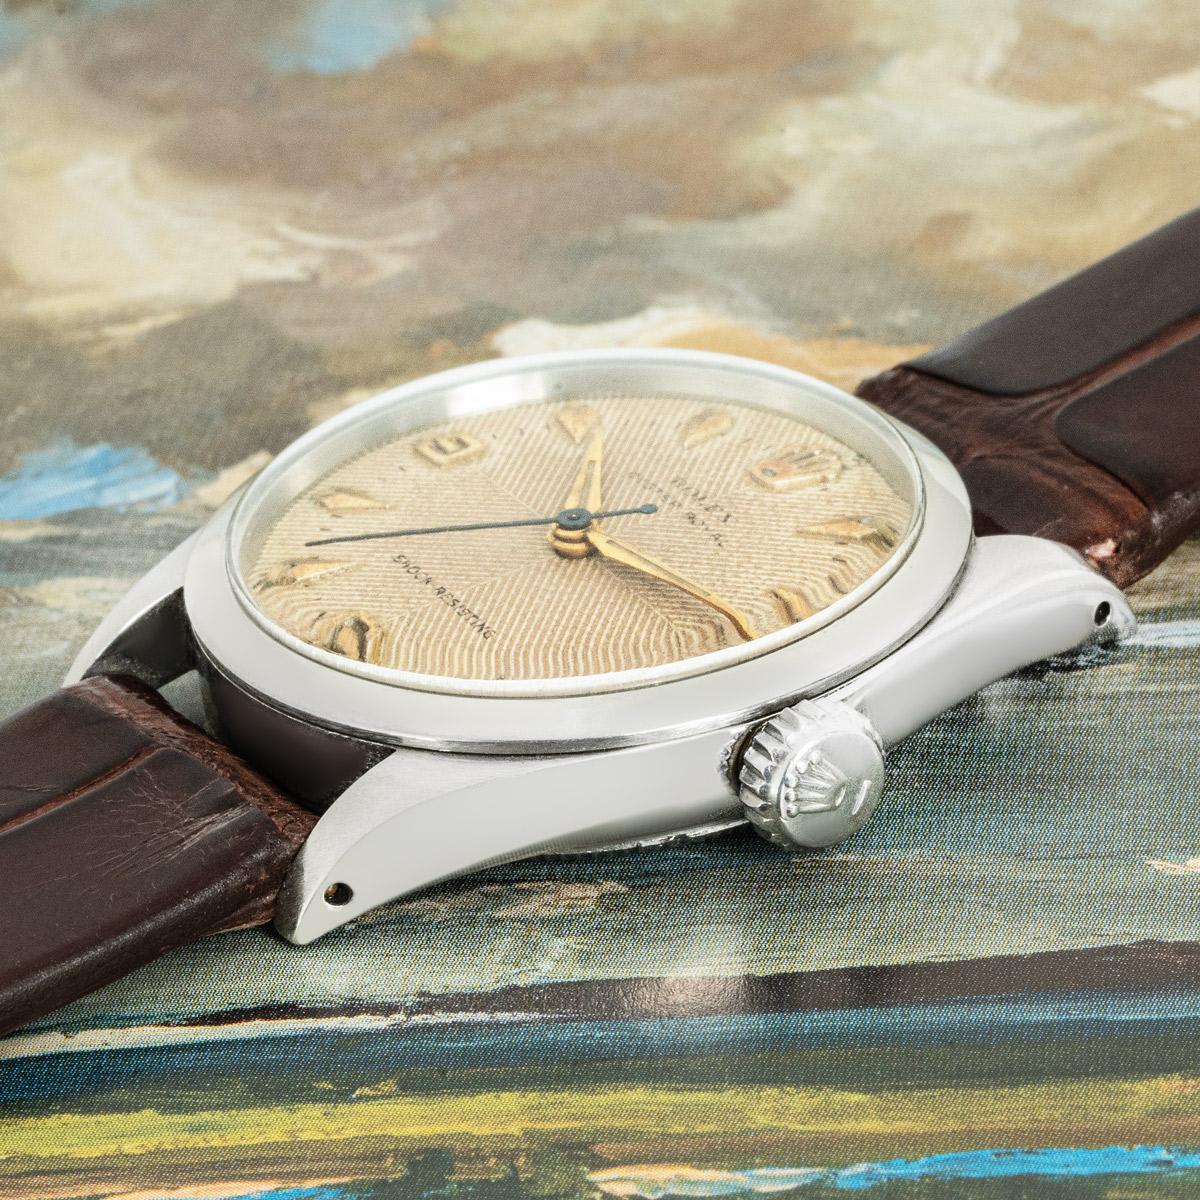 A vintage 32mm Rolex Oyster Royal crafted in stainless steel. Featuring a stunning quadrant dial with applied arabic numbers and a steel bezel. Fitted with a plexiglass, a manual winding movement and a brown generic leather strap equipped with a